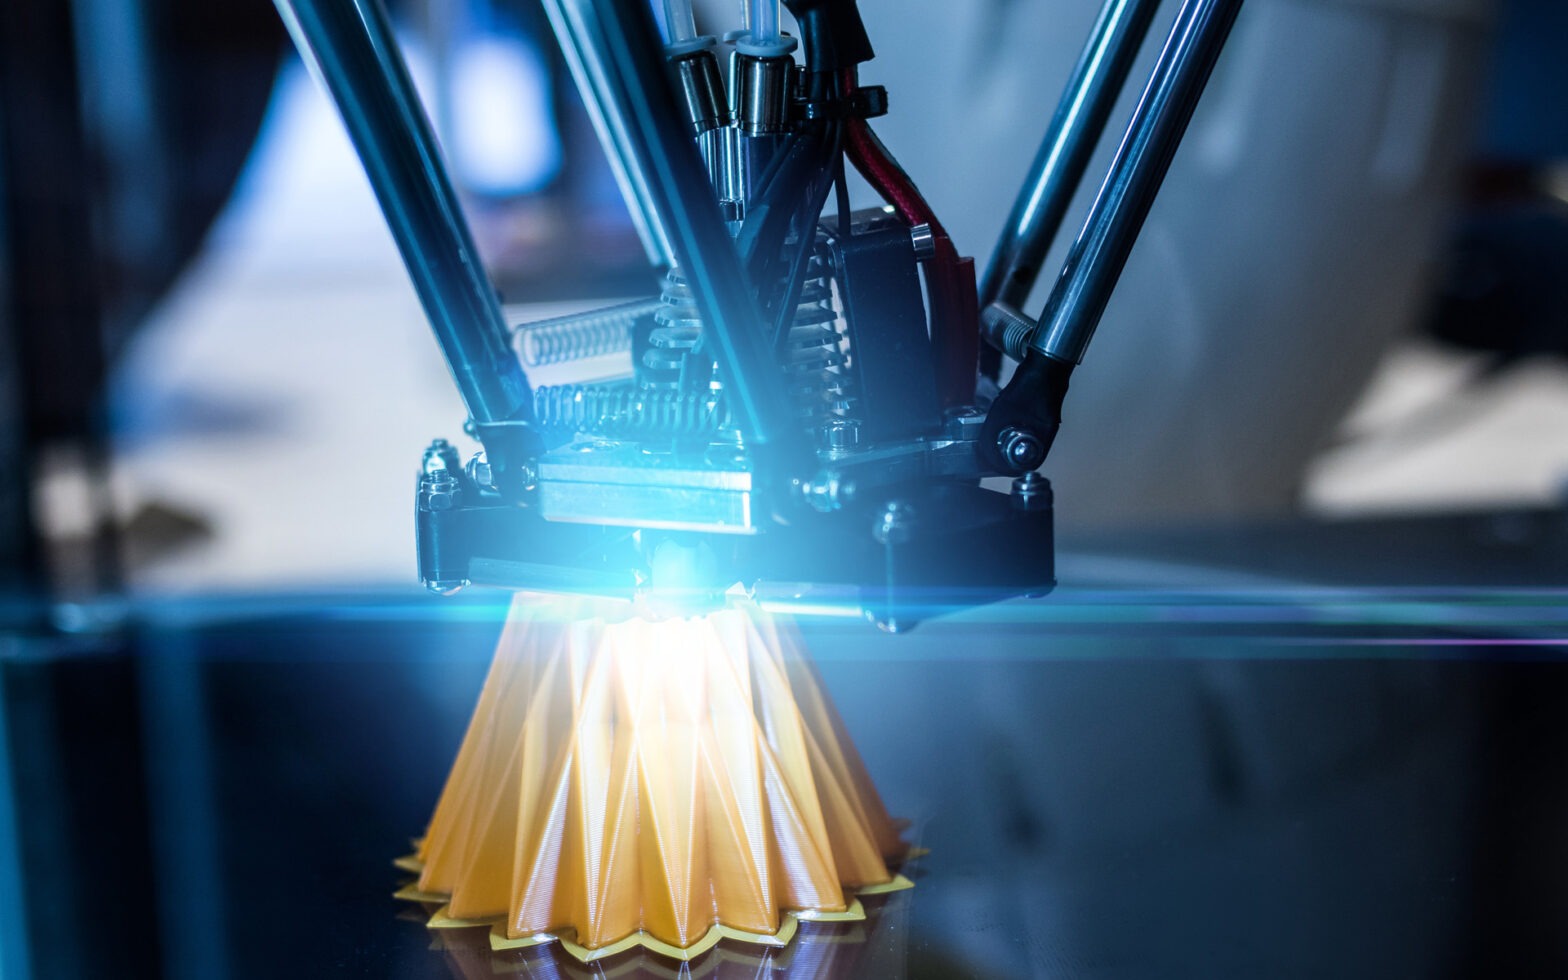 Additive Manufacturing and Material Market